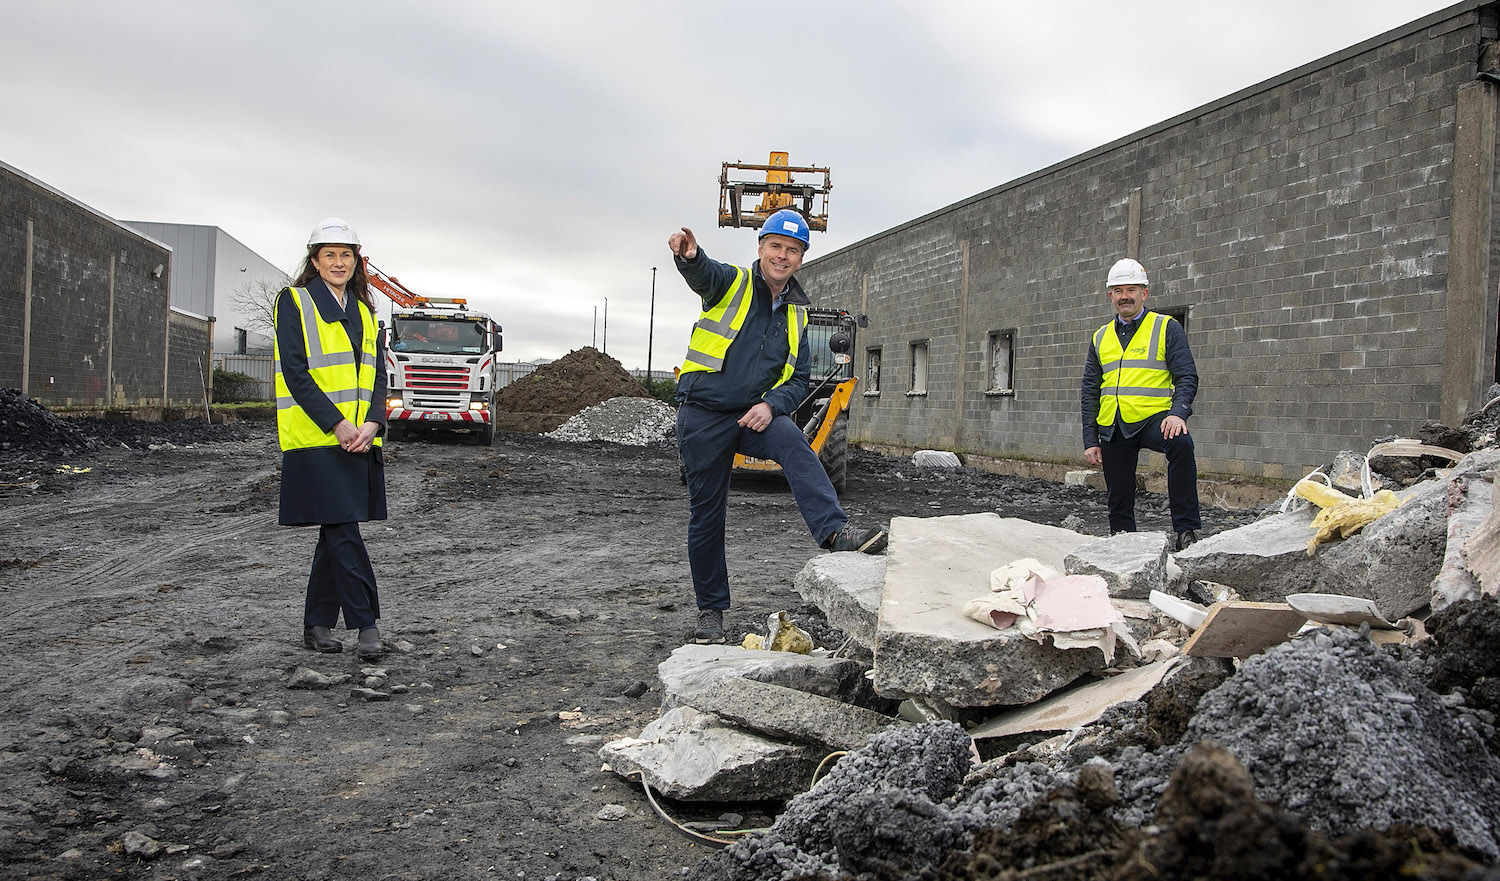 Shannon Campus investment - Pictured L-R Mary Considine, CEO Shannon Group, David McInerney, Director JADA Projects and Gerry Dillon, Shannon Group Property Director. Pic Arthur Ellis.